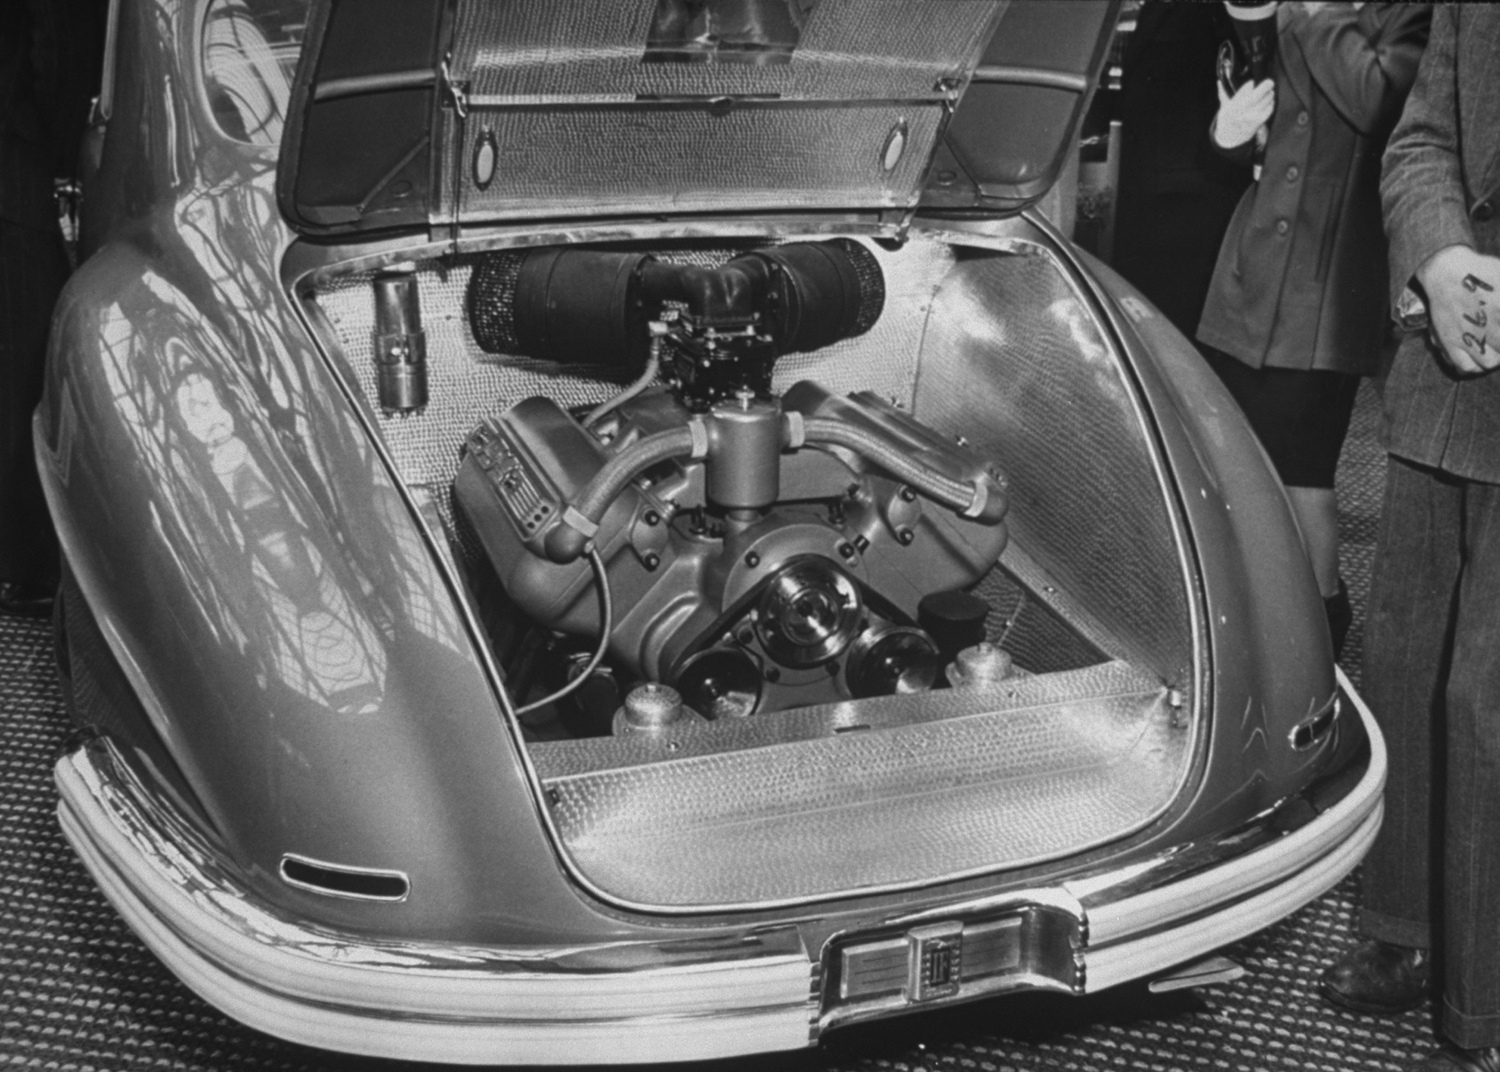 A view of the Italian Isotta Fraschini's engine, 1947.